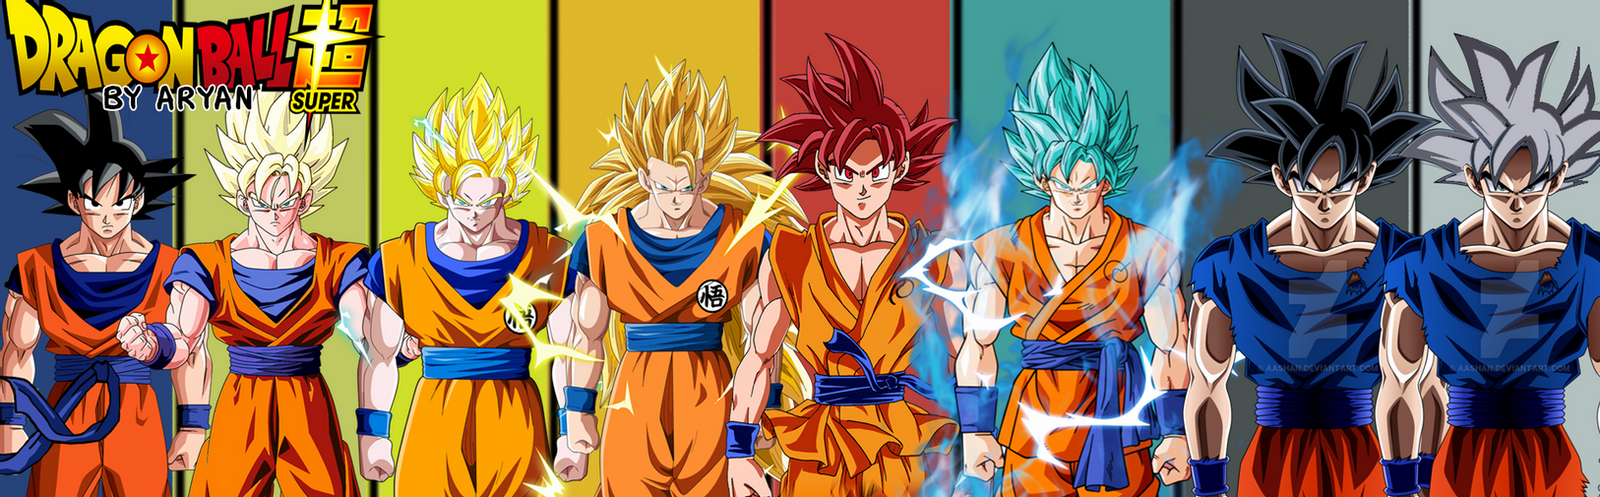 Goku In Every Form Wallpapers Wallpaper Cave 4829